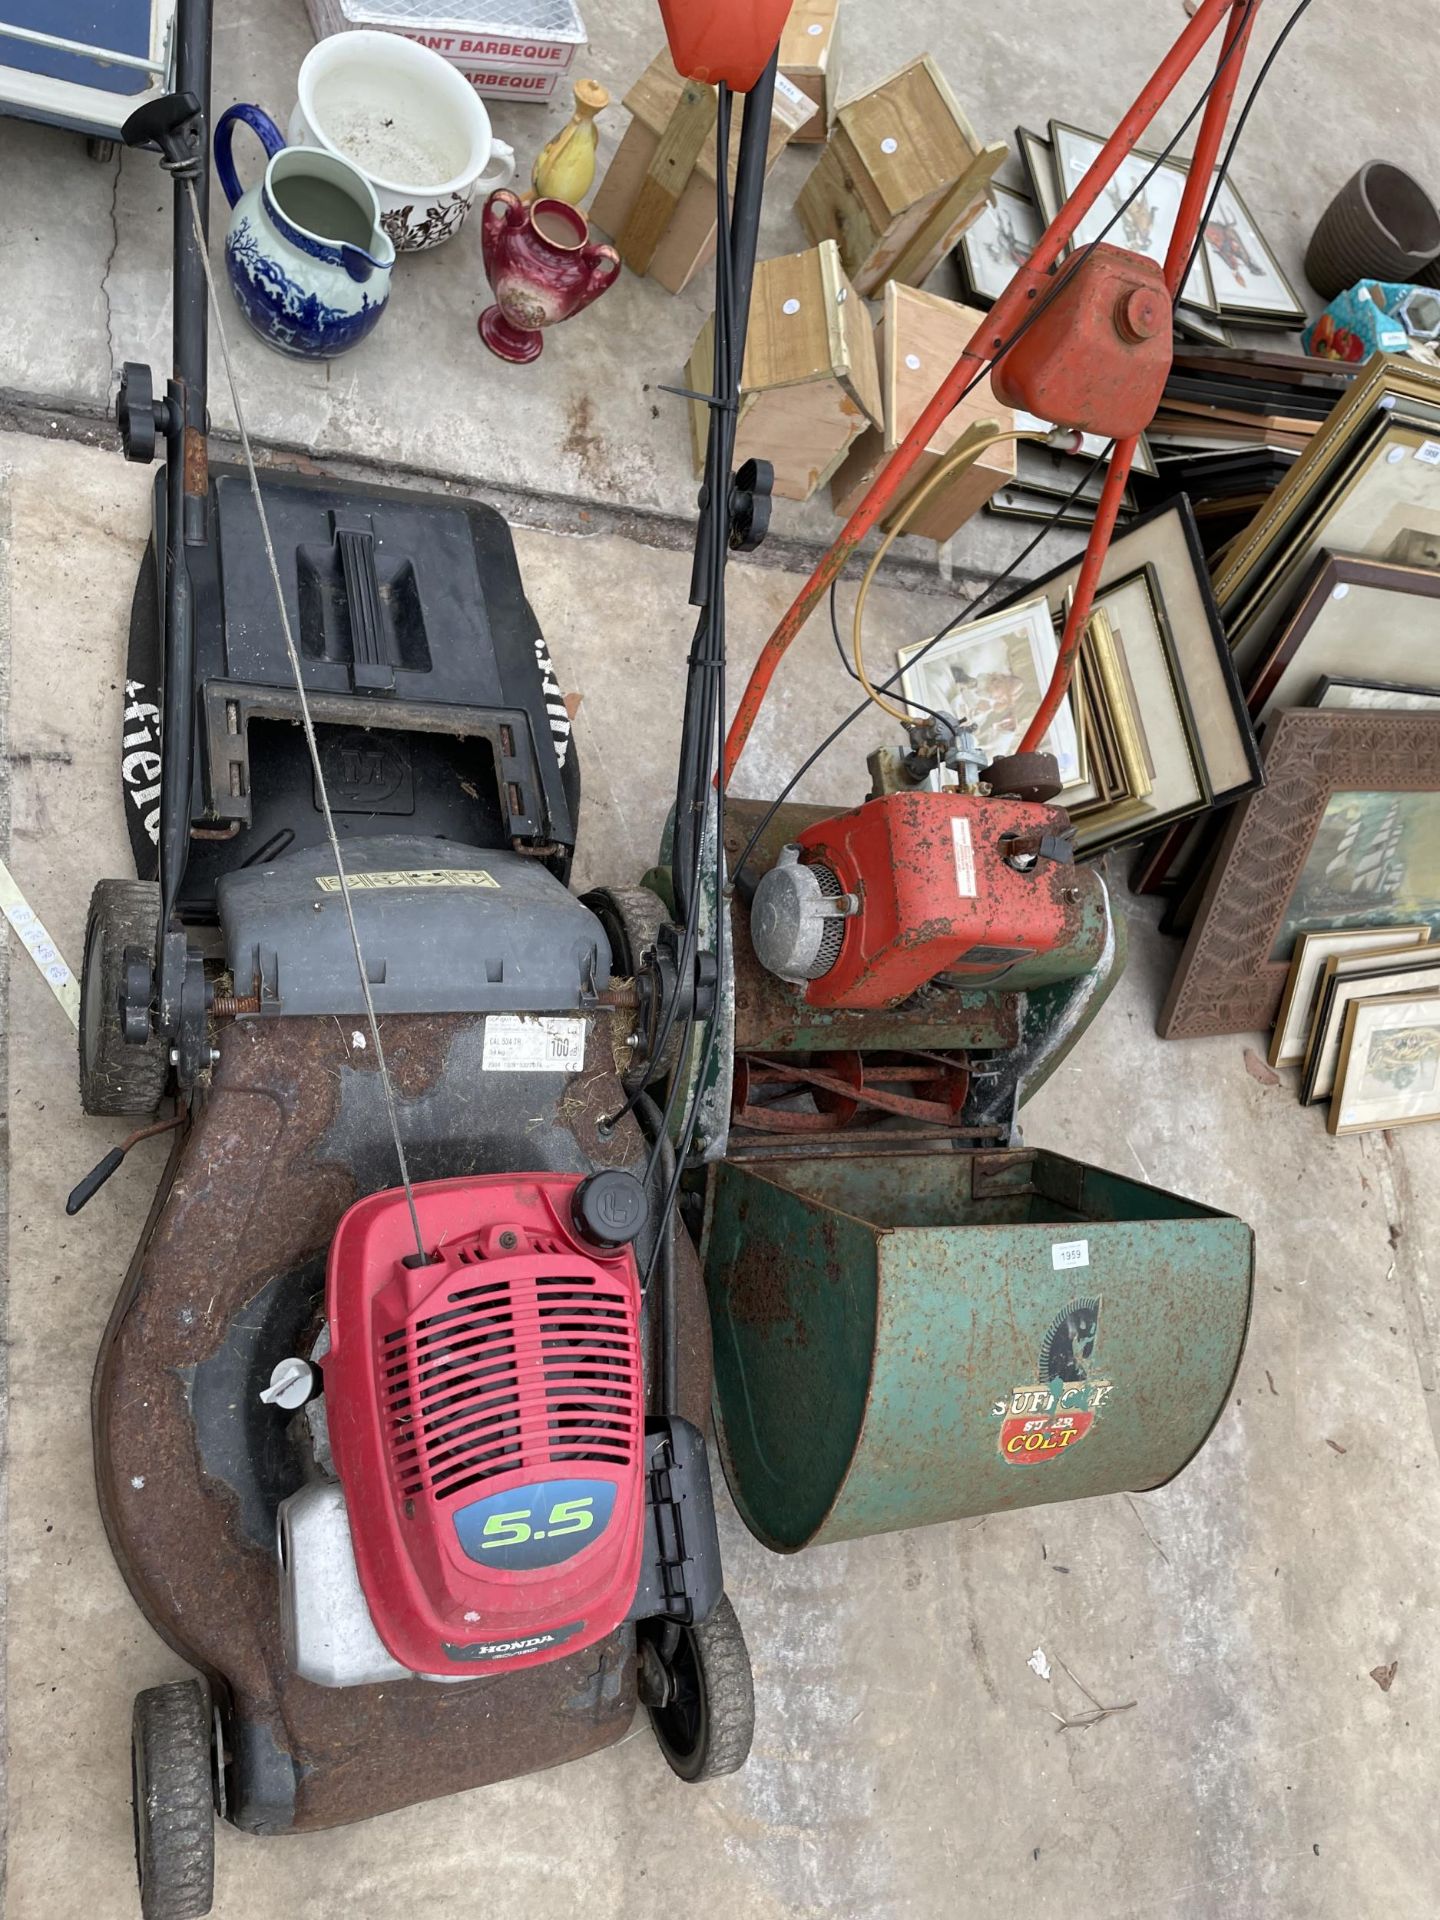 A SUFFOLK SPER COLT CYLINDER MOWER AND A HONDA ROTARY LAWN MOWER - Image 3 of 3